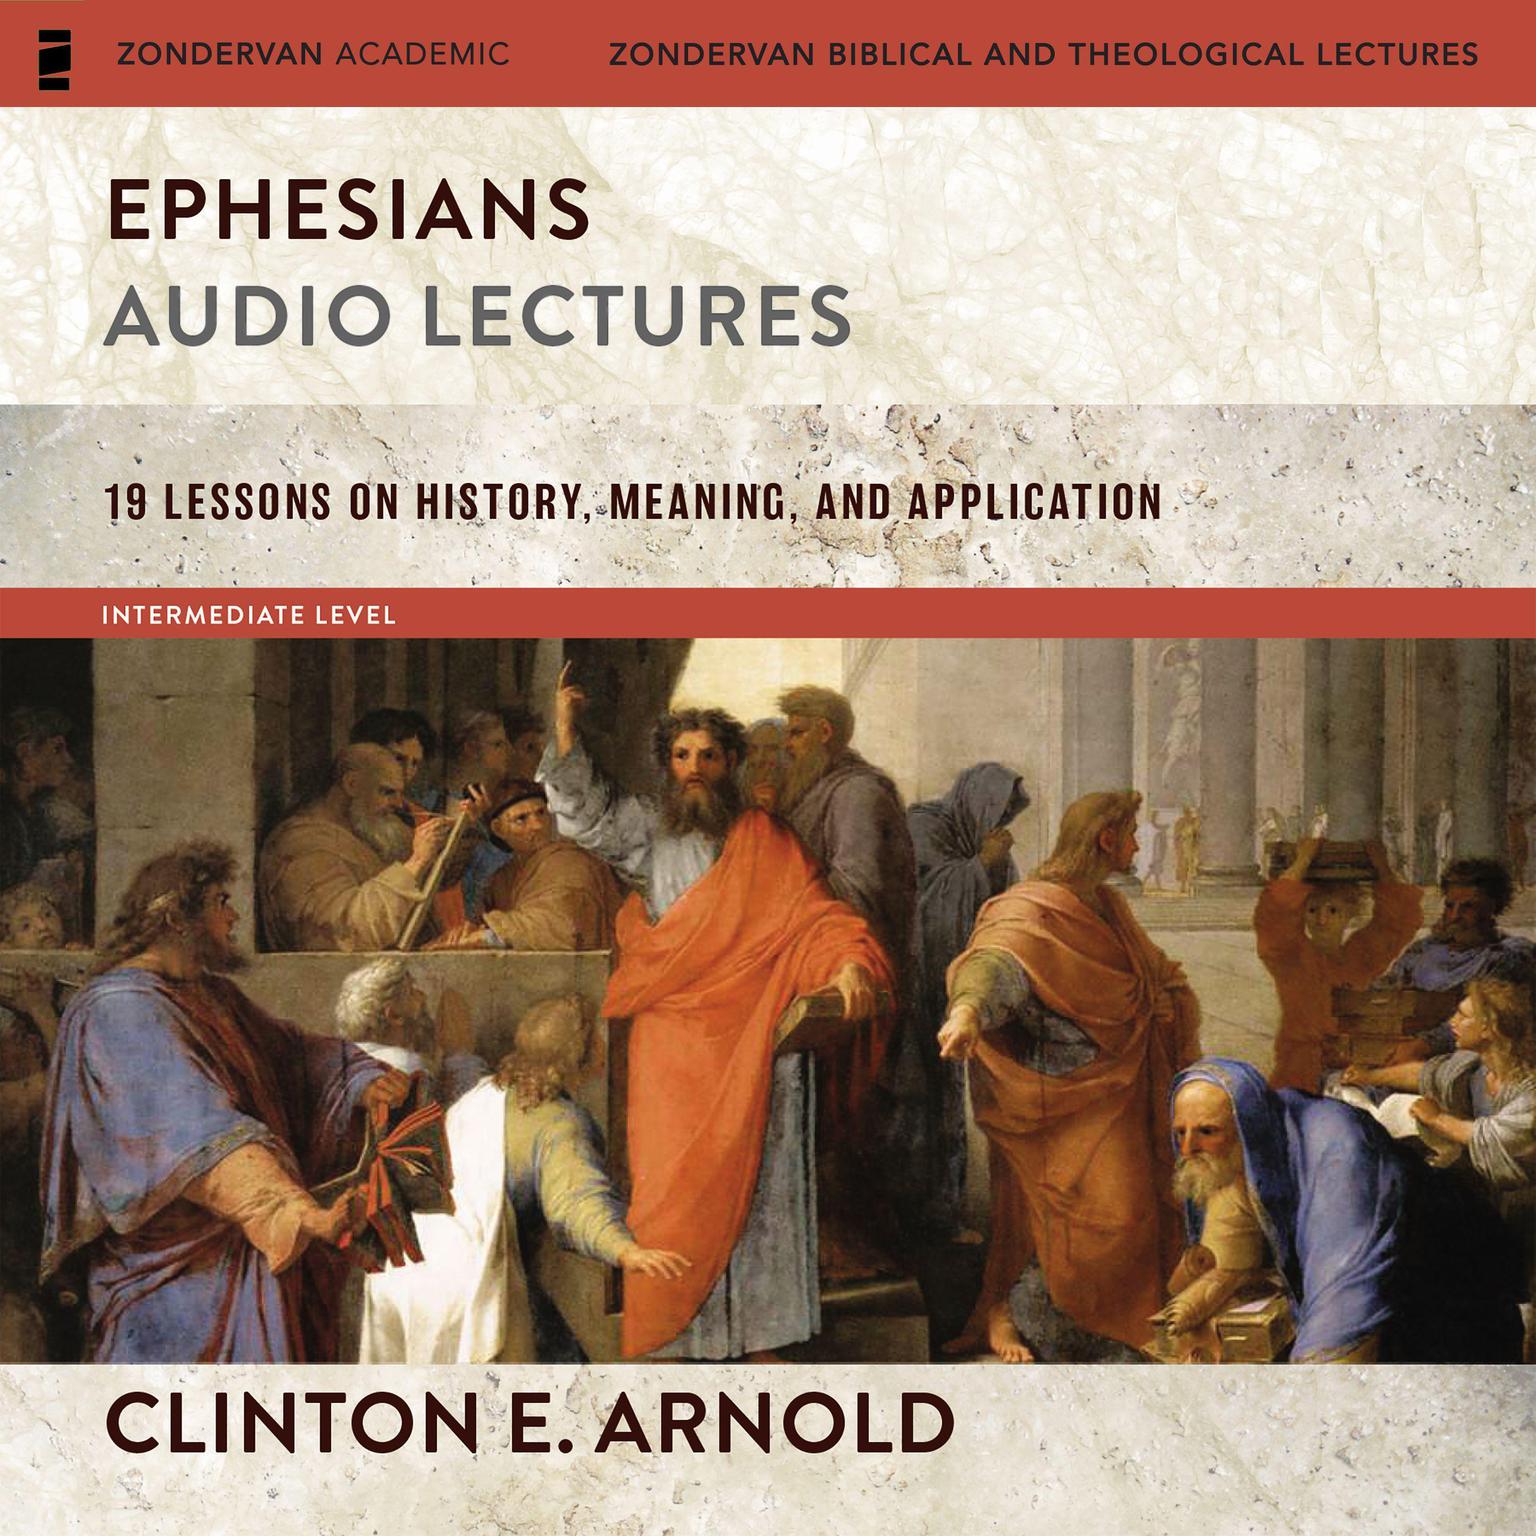 Ephesians: Audio Lectures: 19 Lessons on History, Meaning, and Application Audiobook, by Clinton E. Arnold